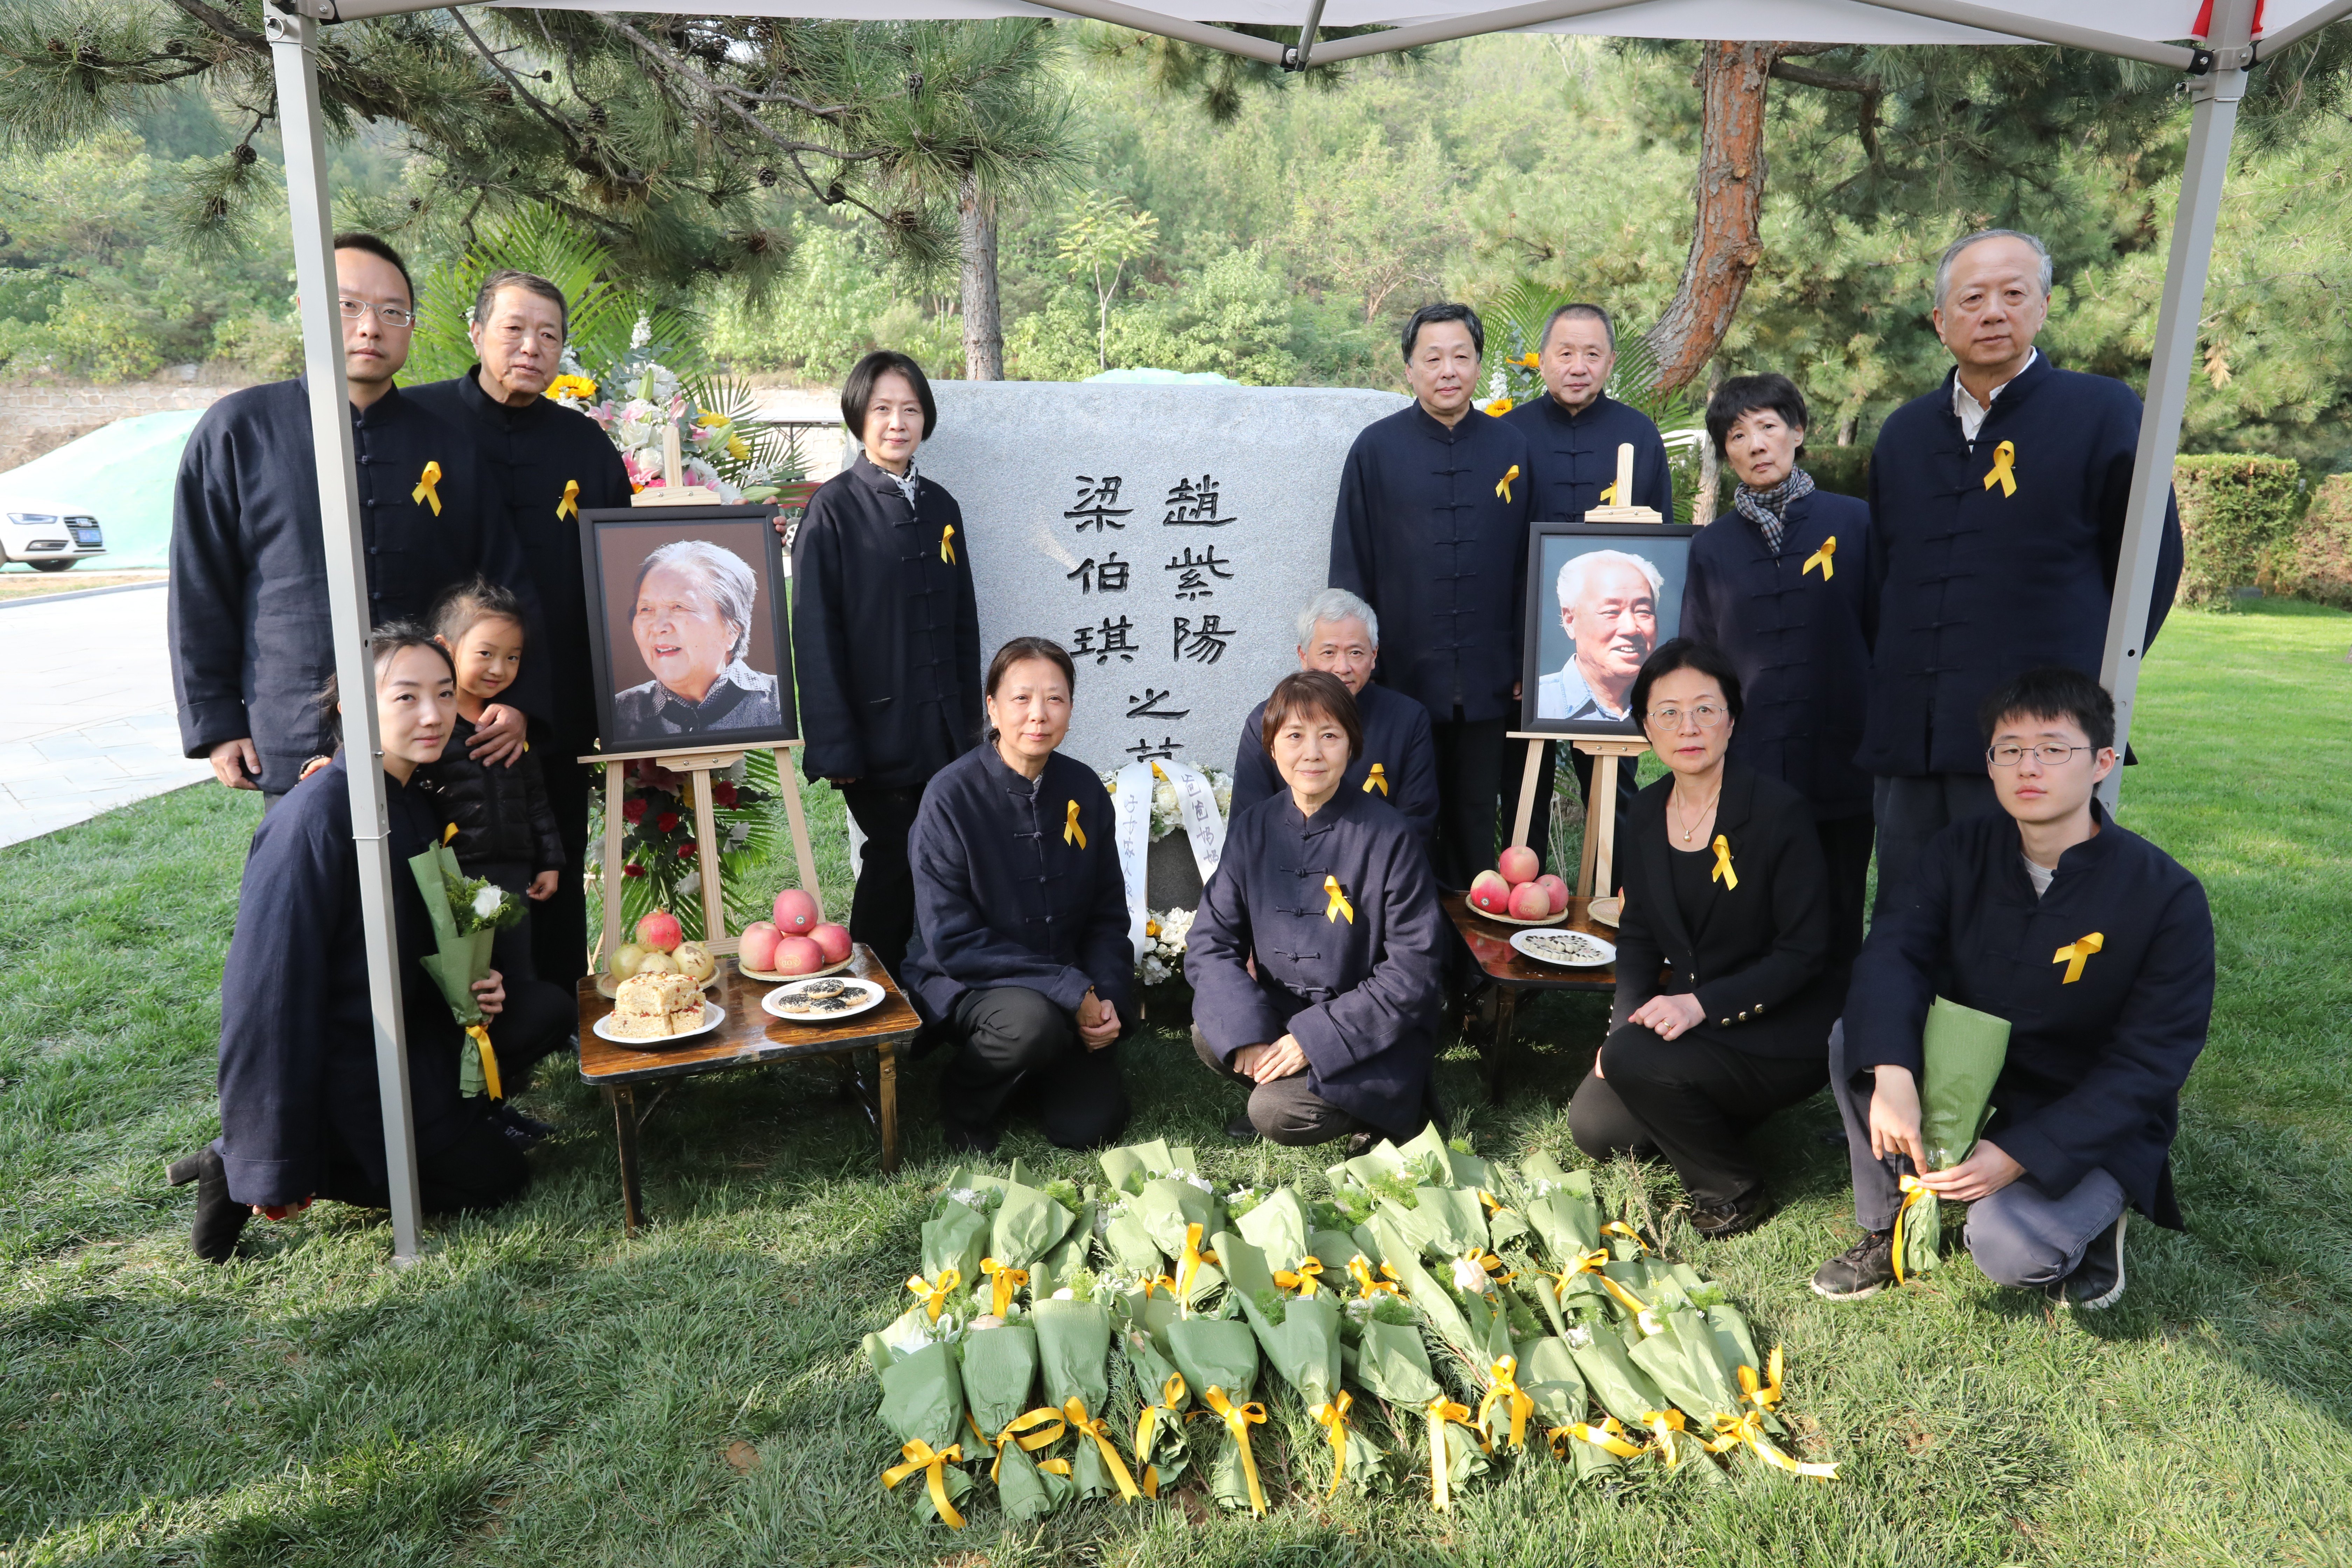 The family of Zhao Ziyang and his wife Liang Boqi pay their respects at the grave where their ashes were interred on Friday. Photo: Simon Song